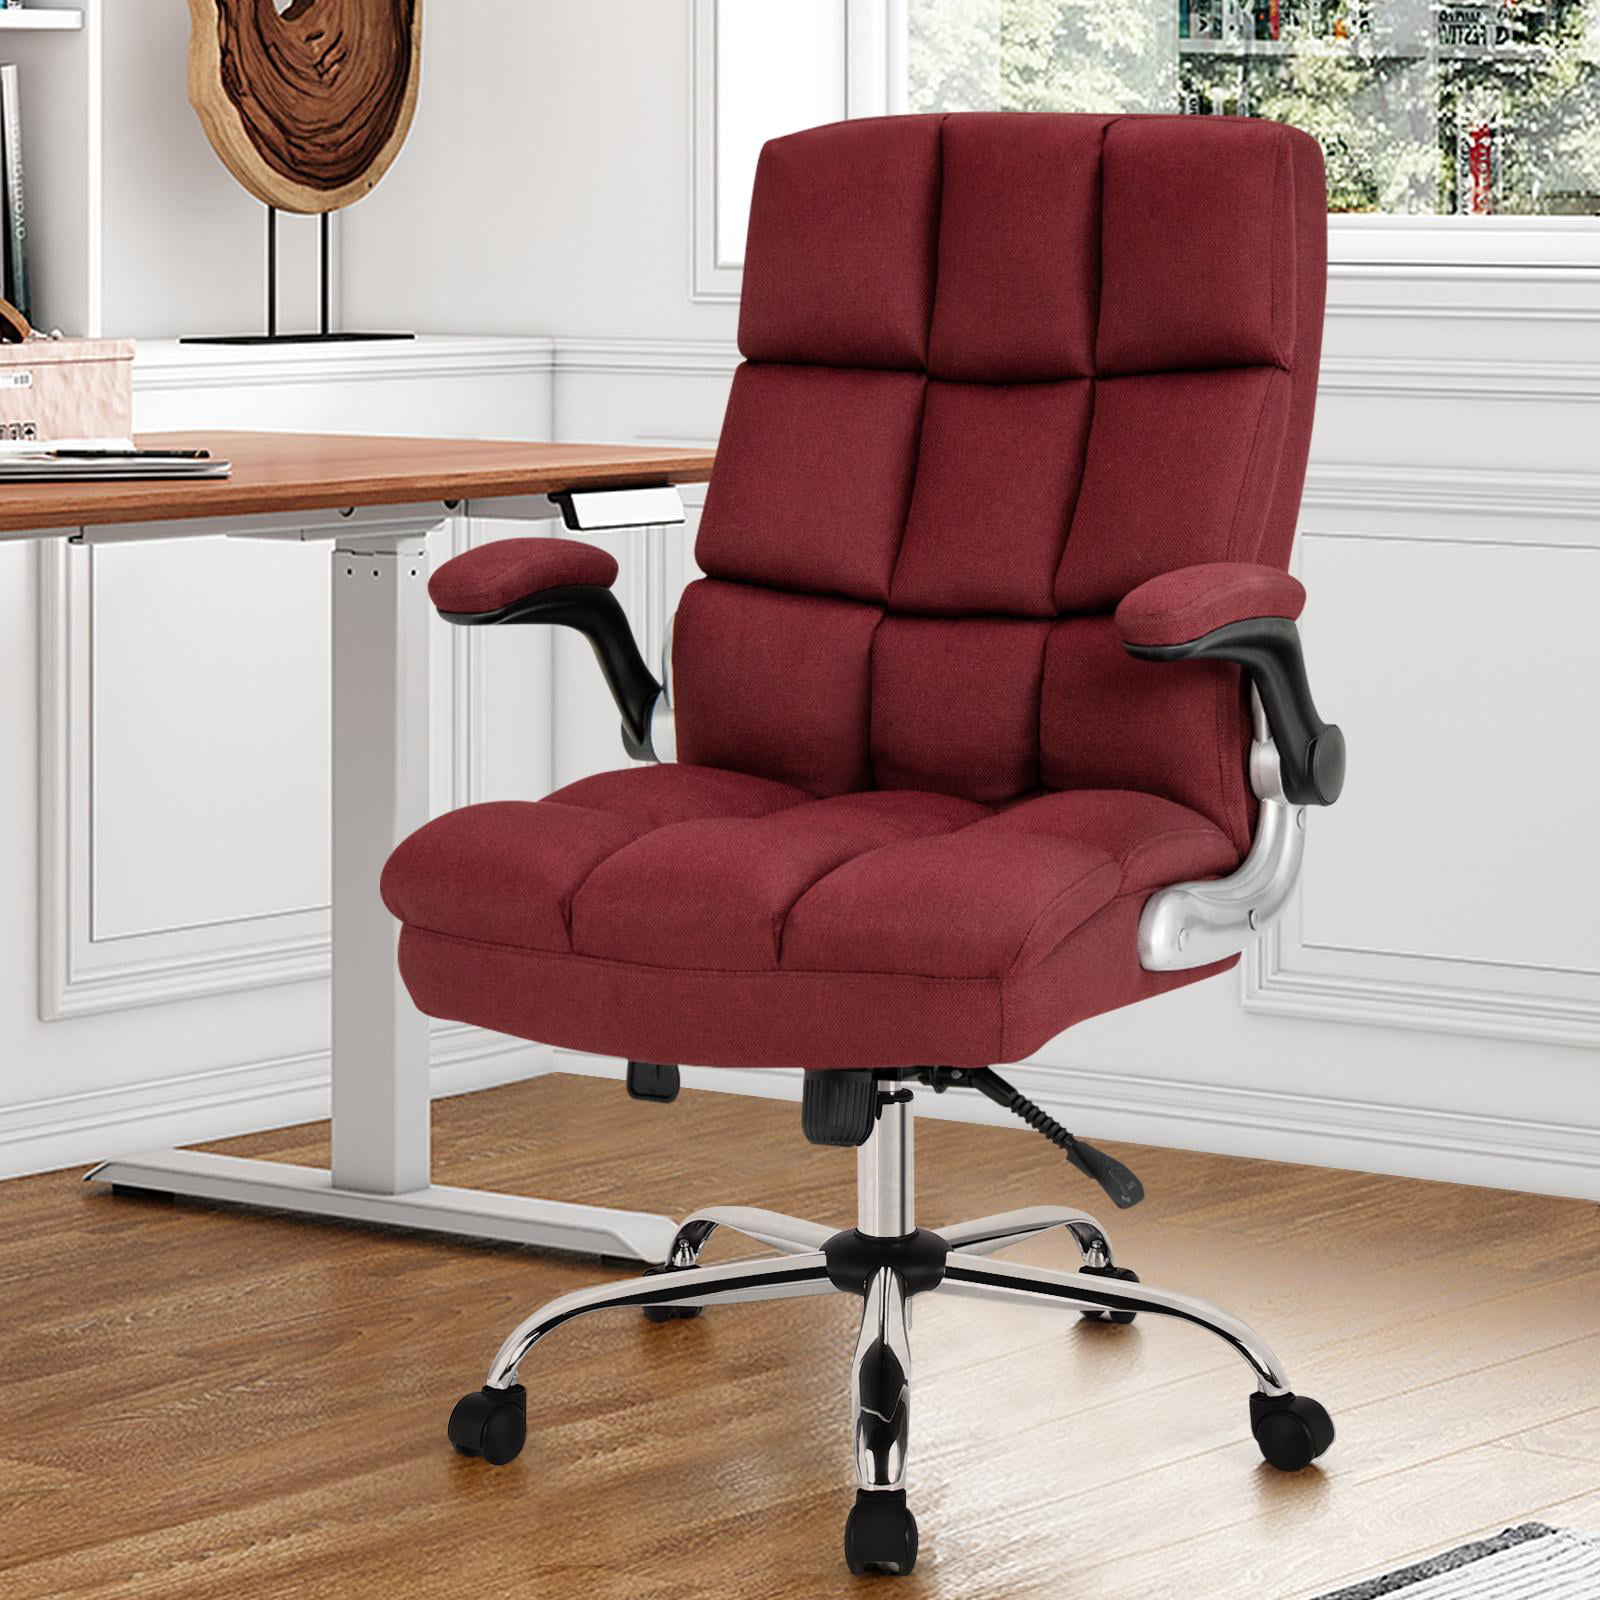 Seatingplus Teddy Fleece Home Office Chair Adjustable Tilt Angle and  Flip-up Arms Executive Computer Desk Chair, Thick Padding for Comfort and